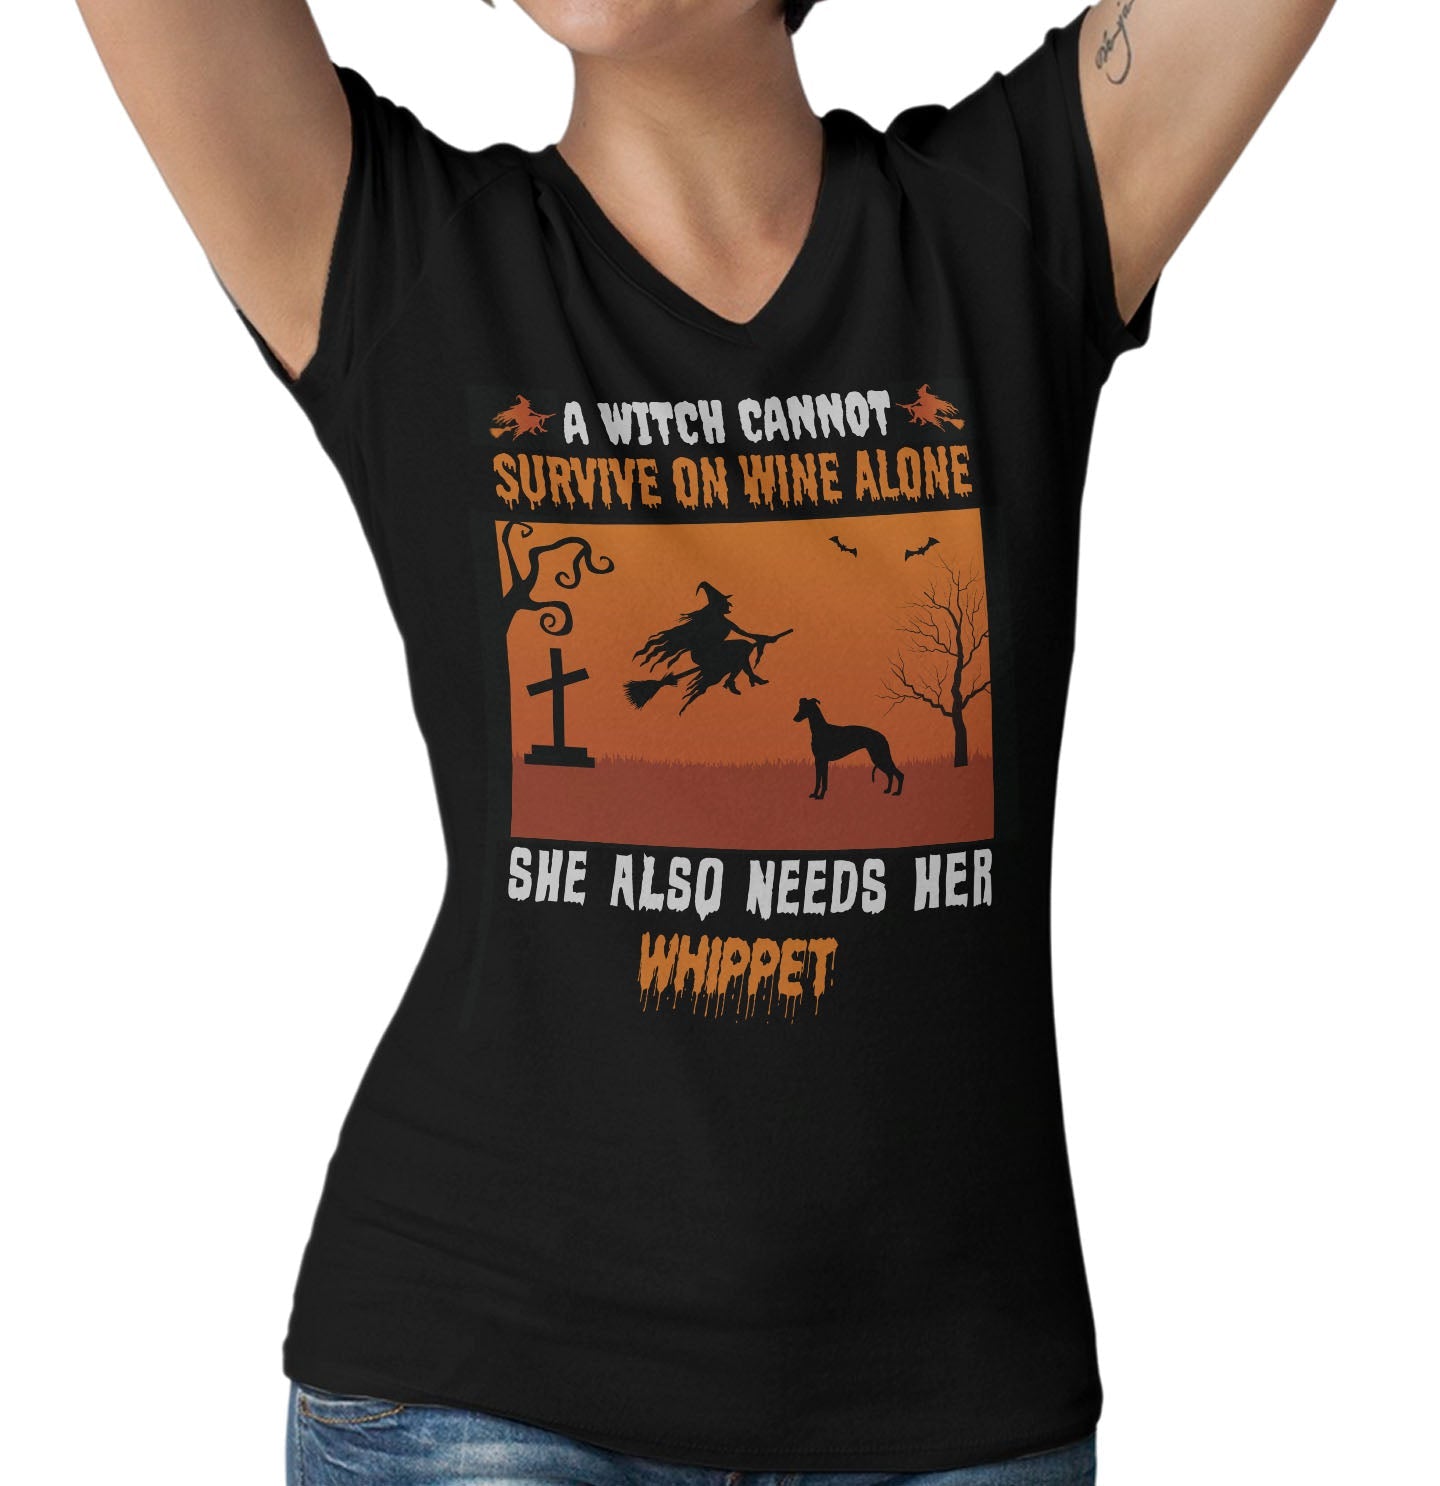 A Witch Needs Her Whippet - Women's V-Neck T-Shirt